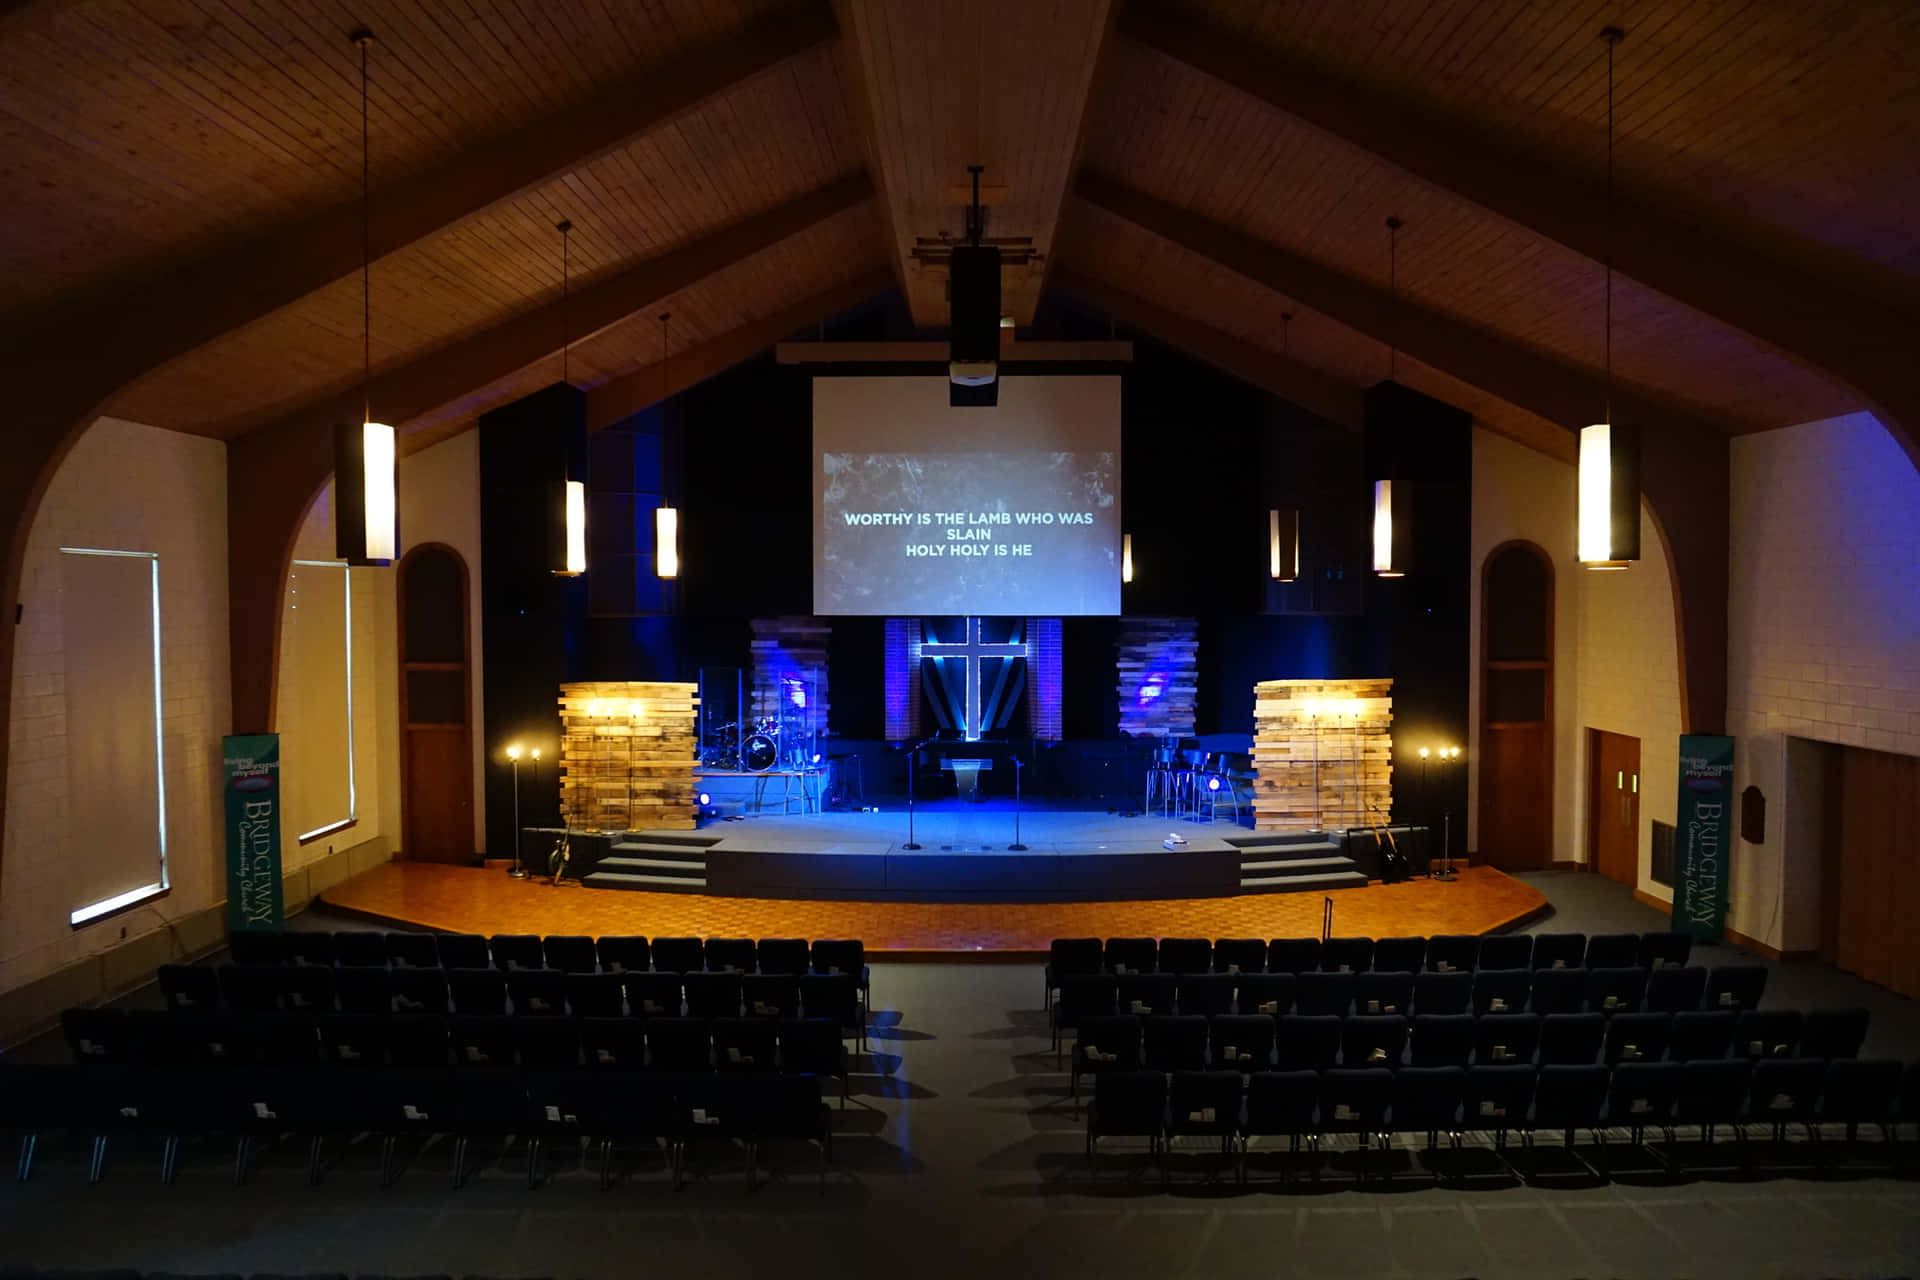 A Church With A Large Stage And A Large Screen